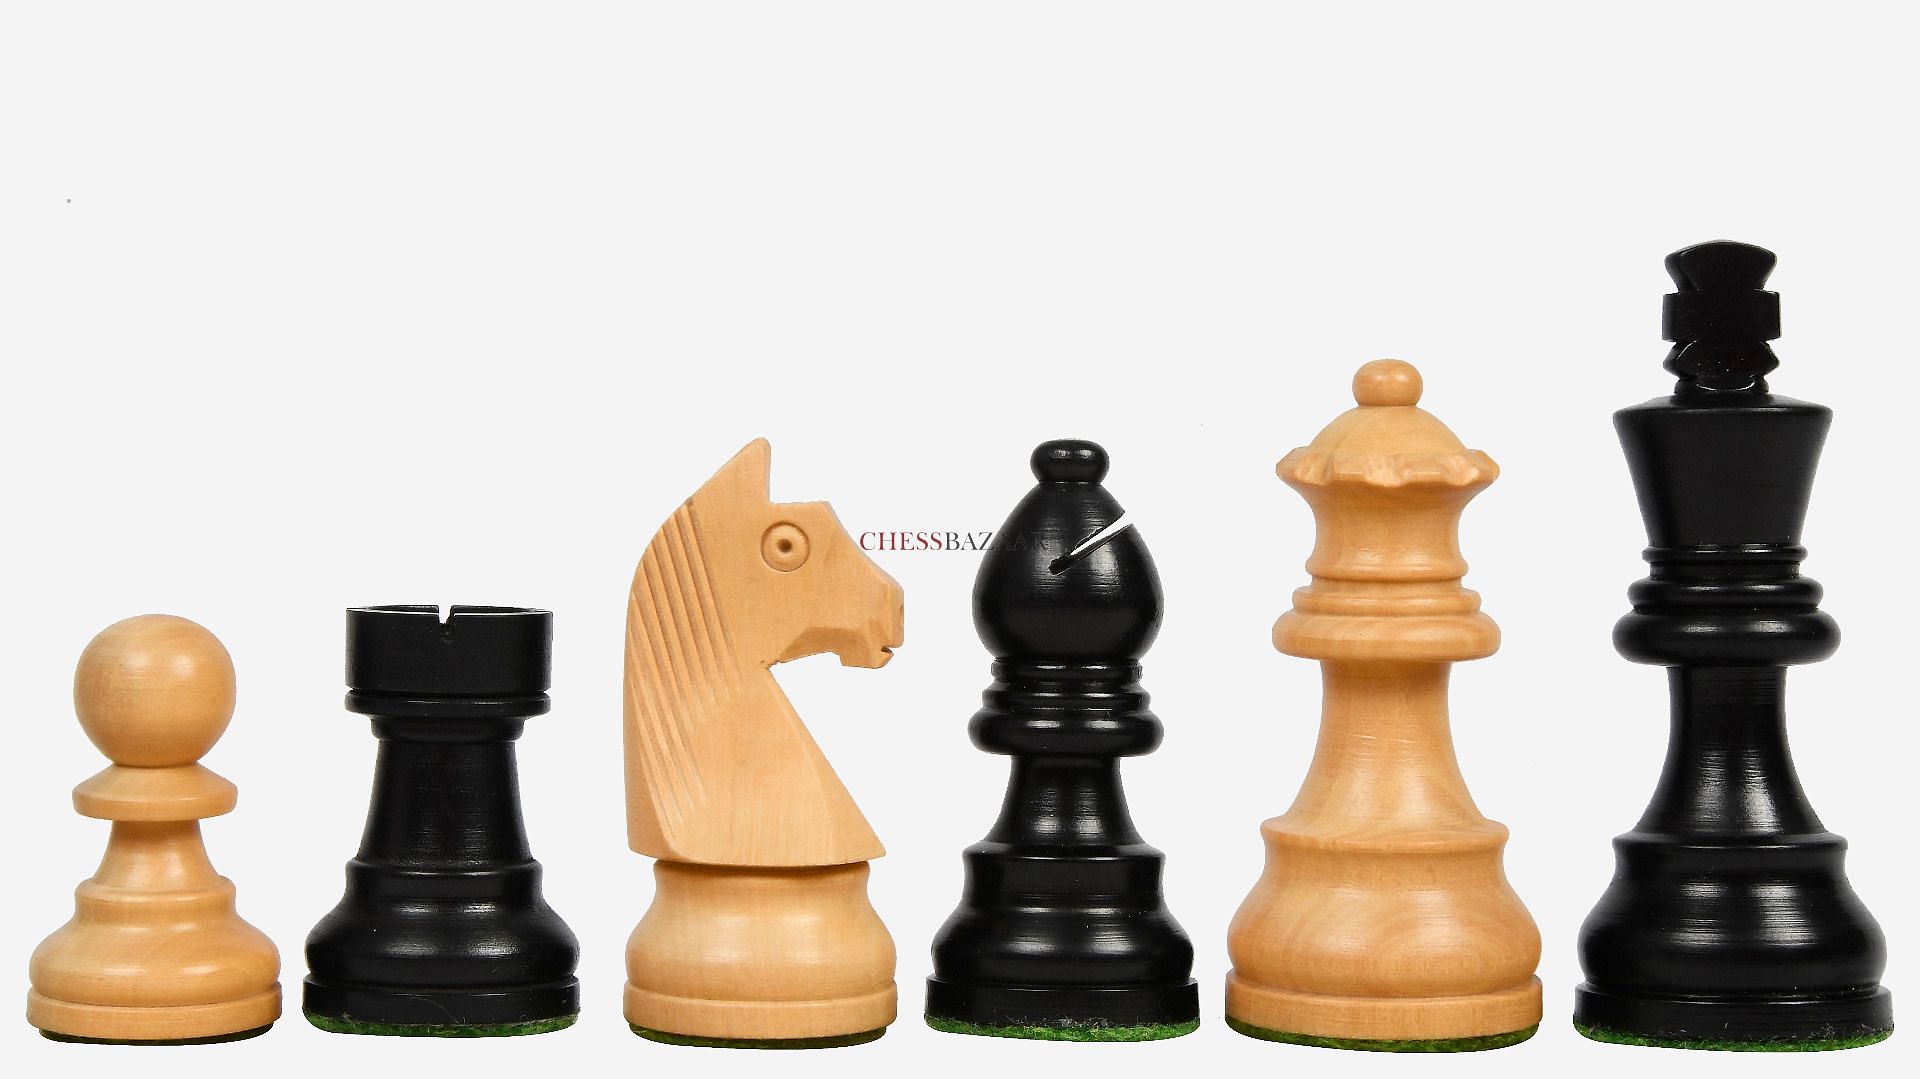 Wholesale Luxury Wooden Chess Games Set Folding Chess Board